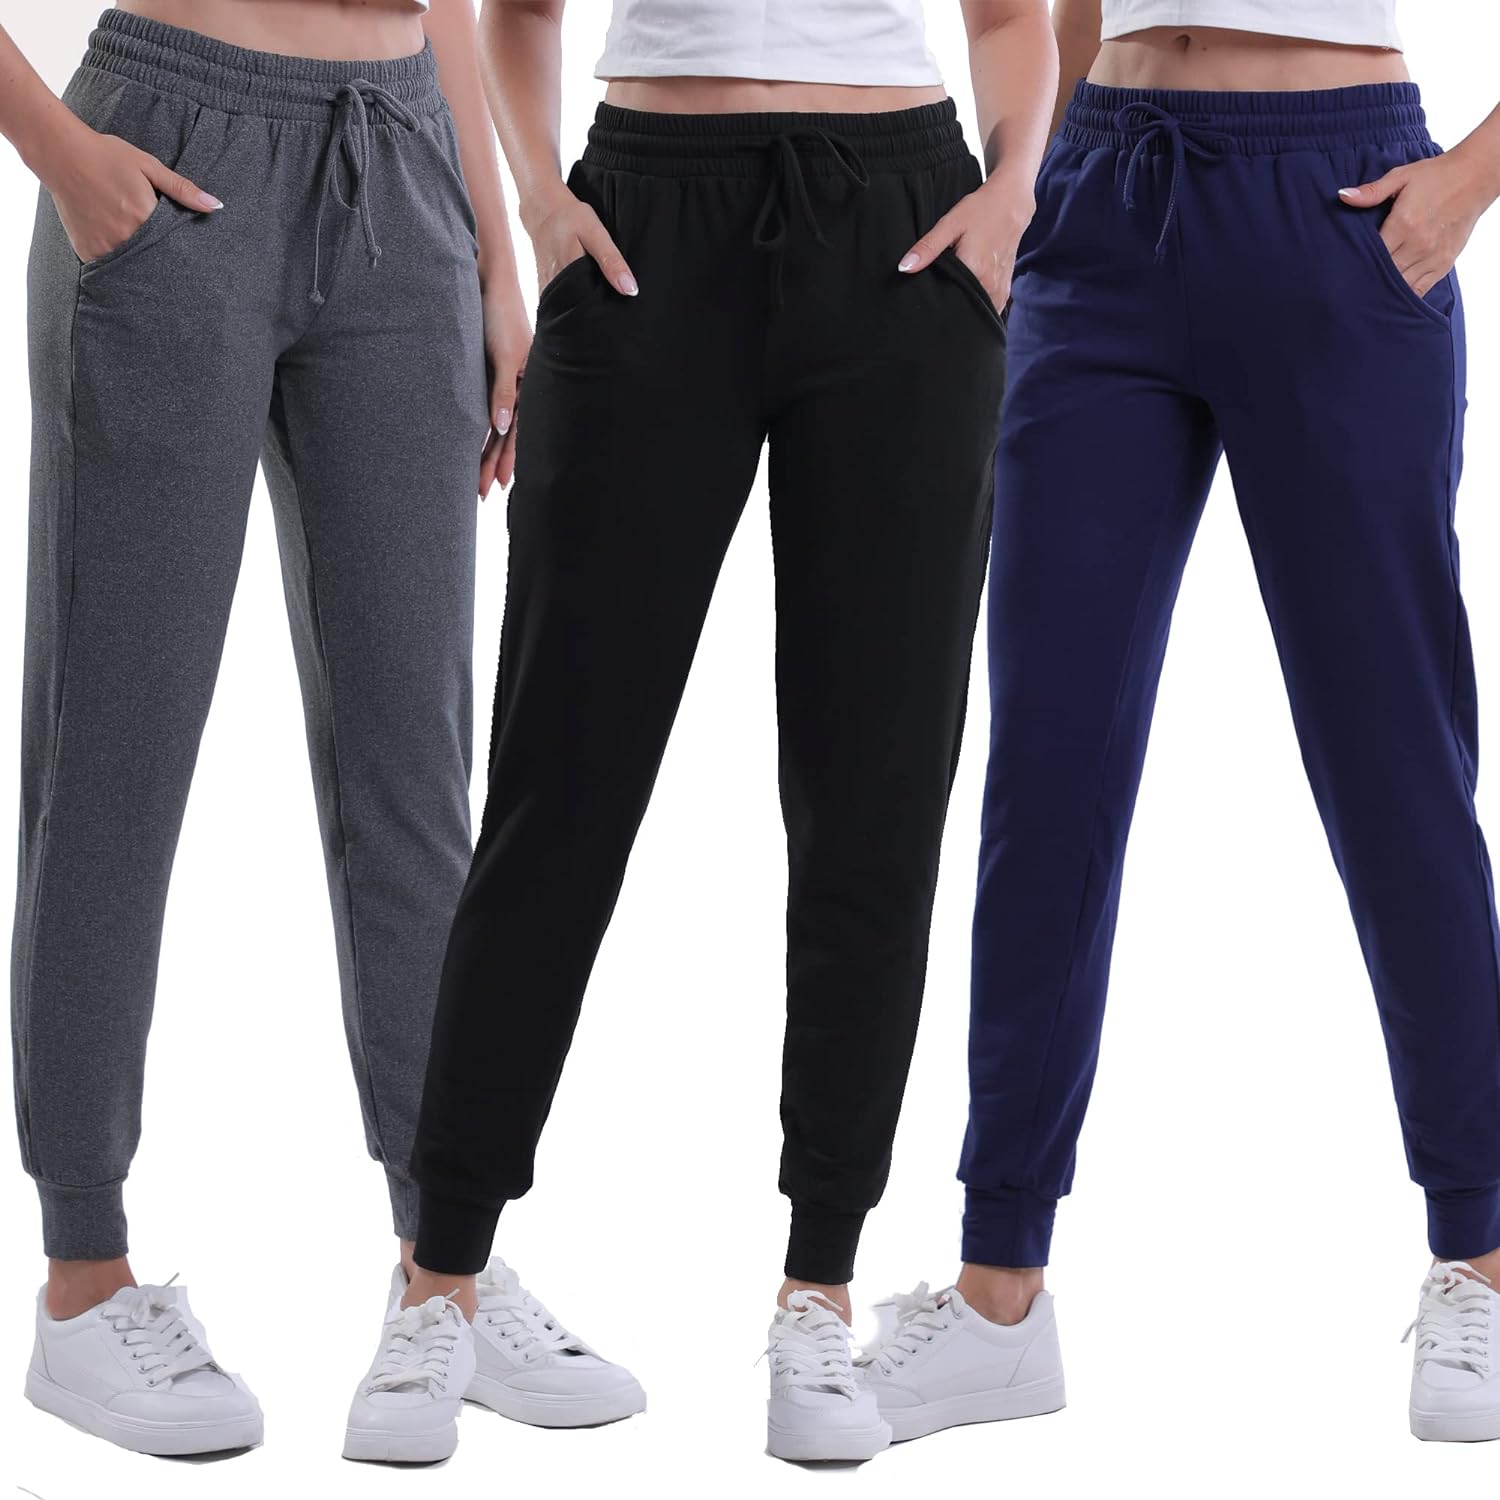 joggers for women